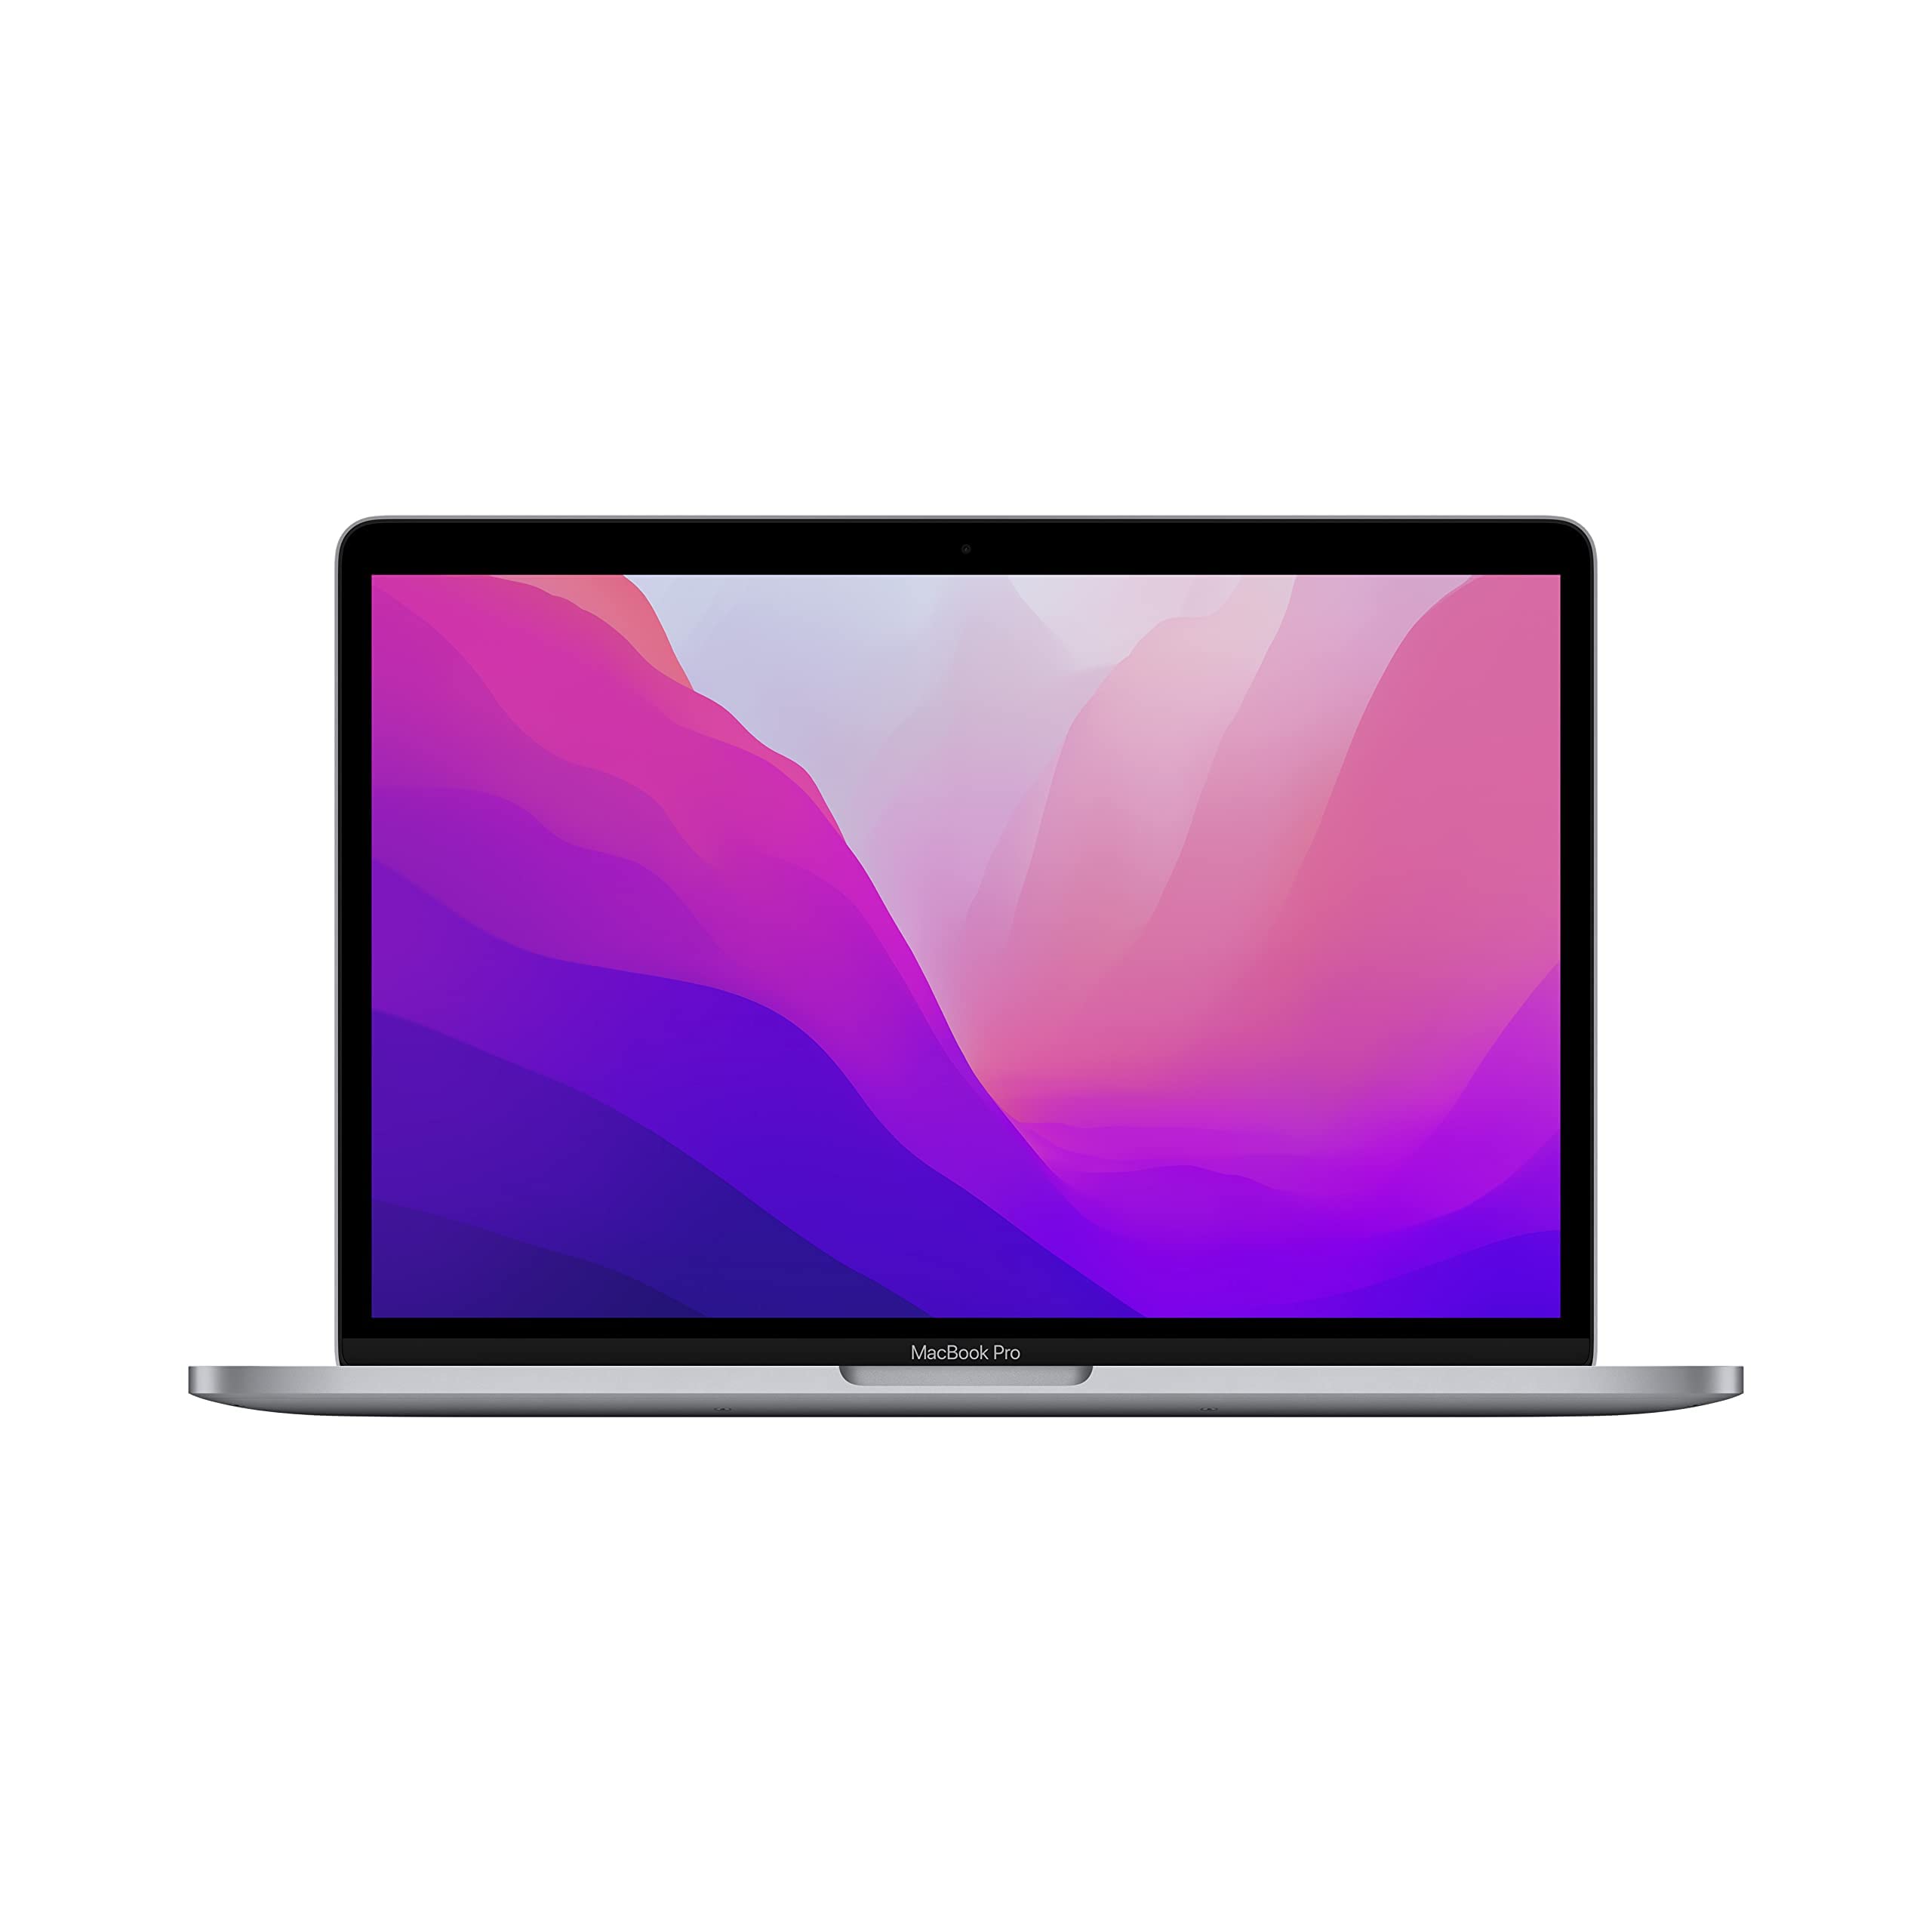 2022 Apple MacBook Pro Laptop with M2 chip: 13-inch Retina Display, 8GB RAM, 256GB ???????SSD ???????Storage, Touch Bar, Backlit Keyboard, FaceTime HD Camera. Works with iPhone and iPad; Space Gray